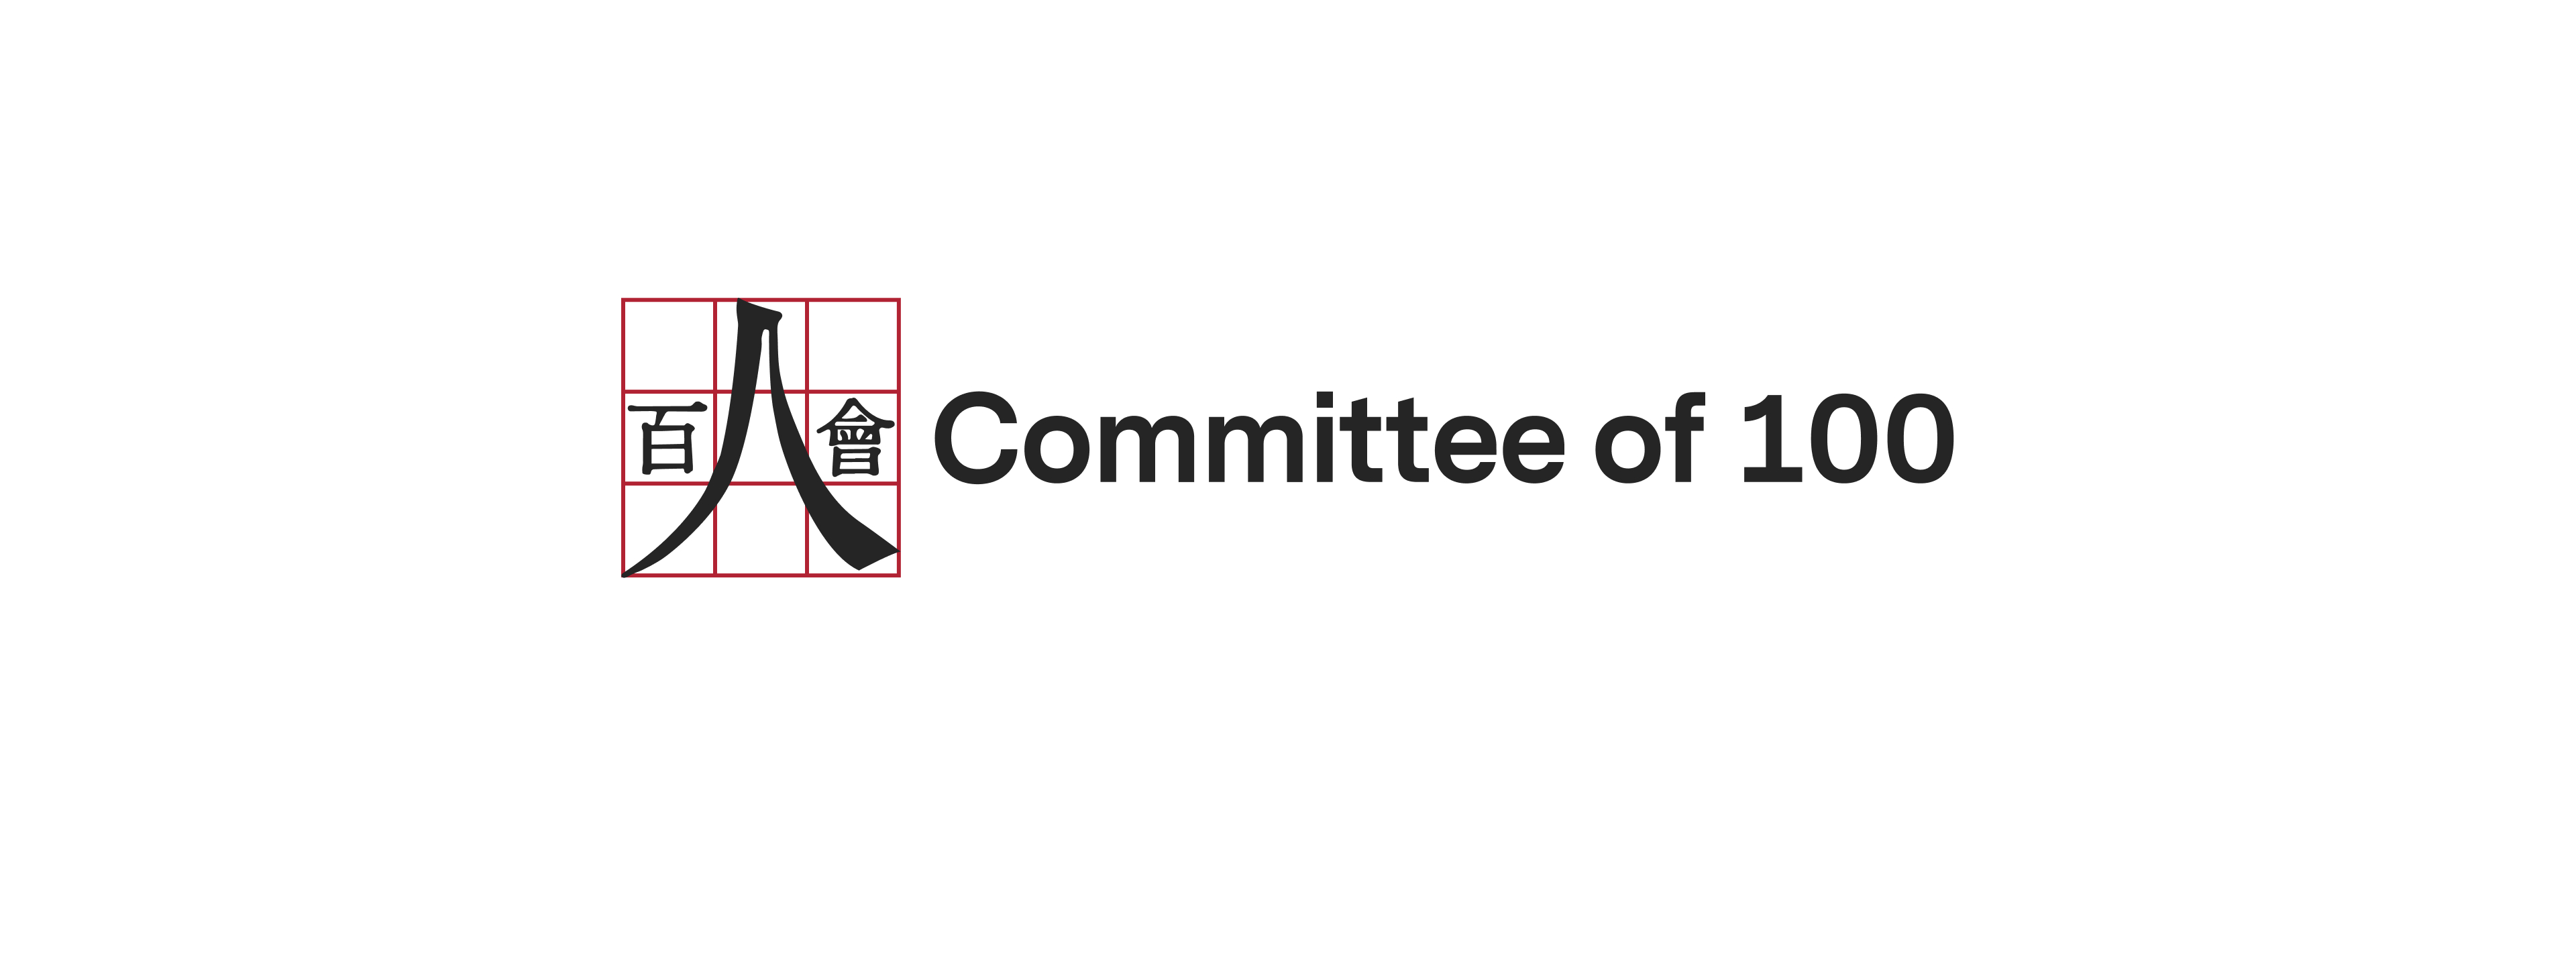 Committee of 100 Connects with More Than 100 Different Groups, Universities and Organizations to Discuss Chinese American Contributions to America Through Its Landmark Study